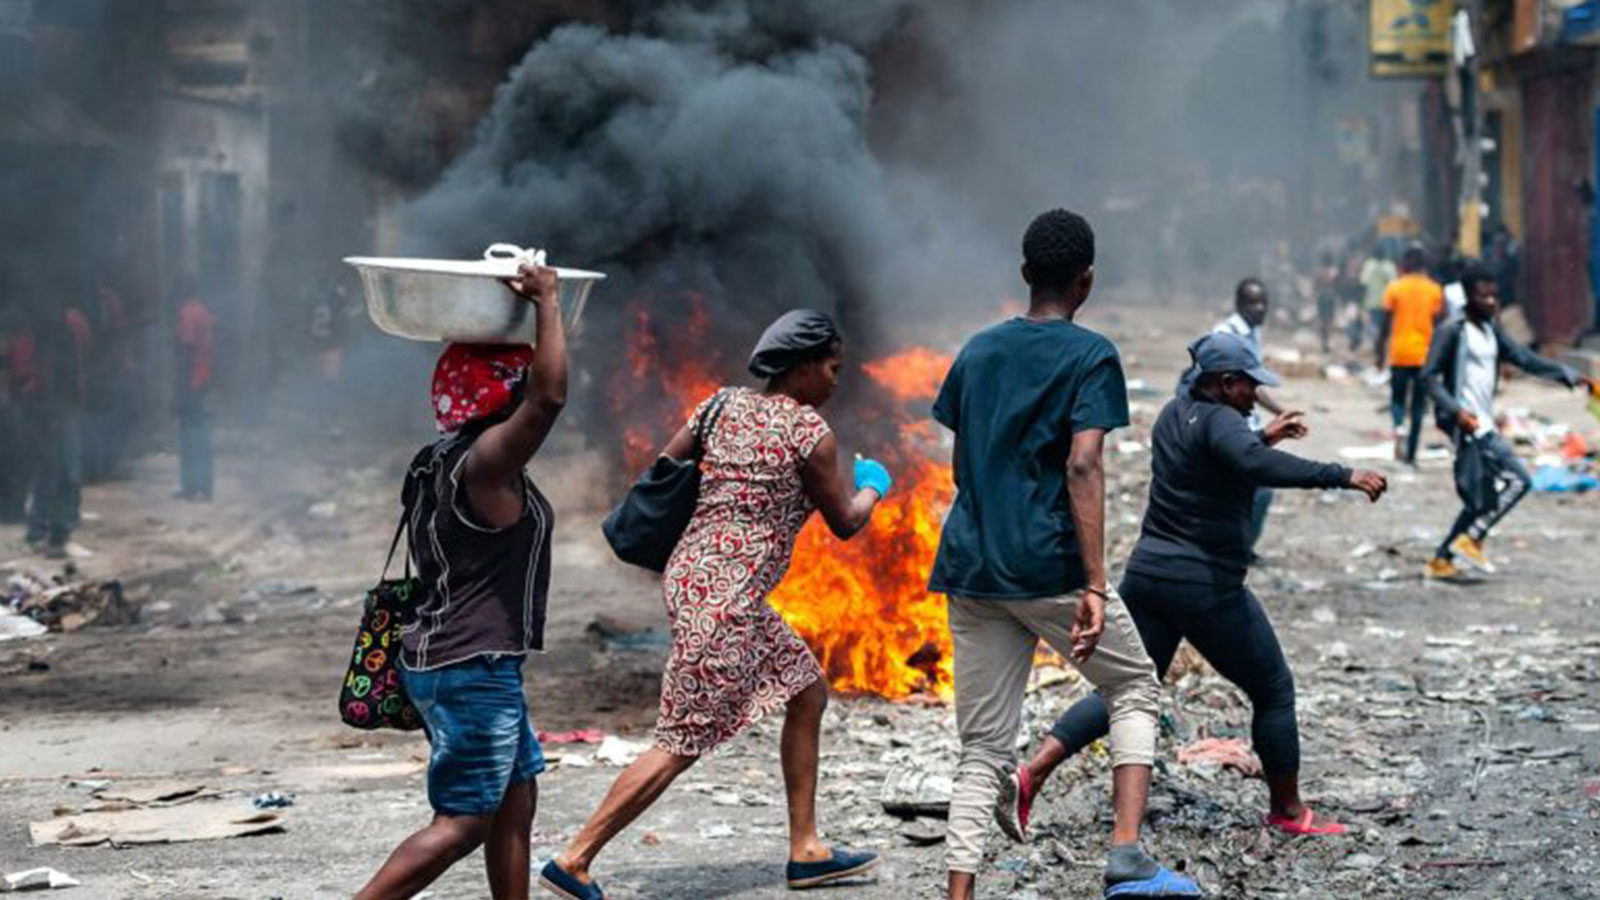 Haiti gang war displaces thousands as anarchy grips nation